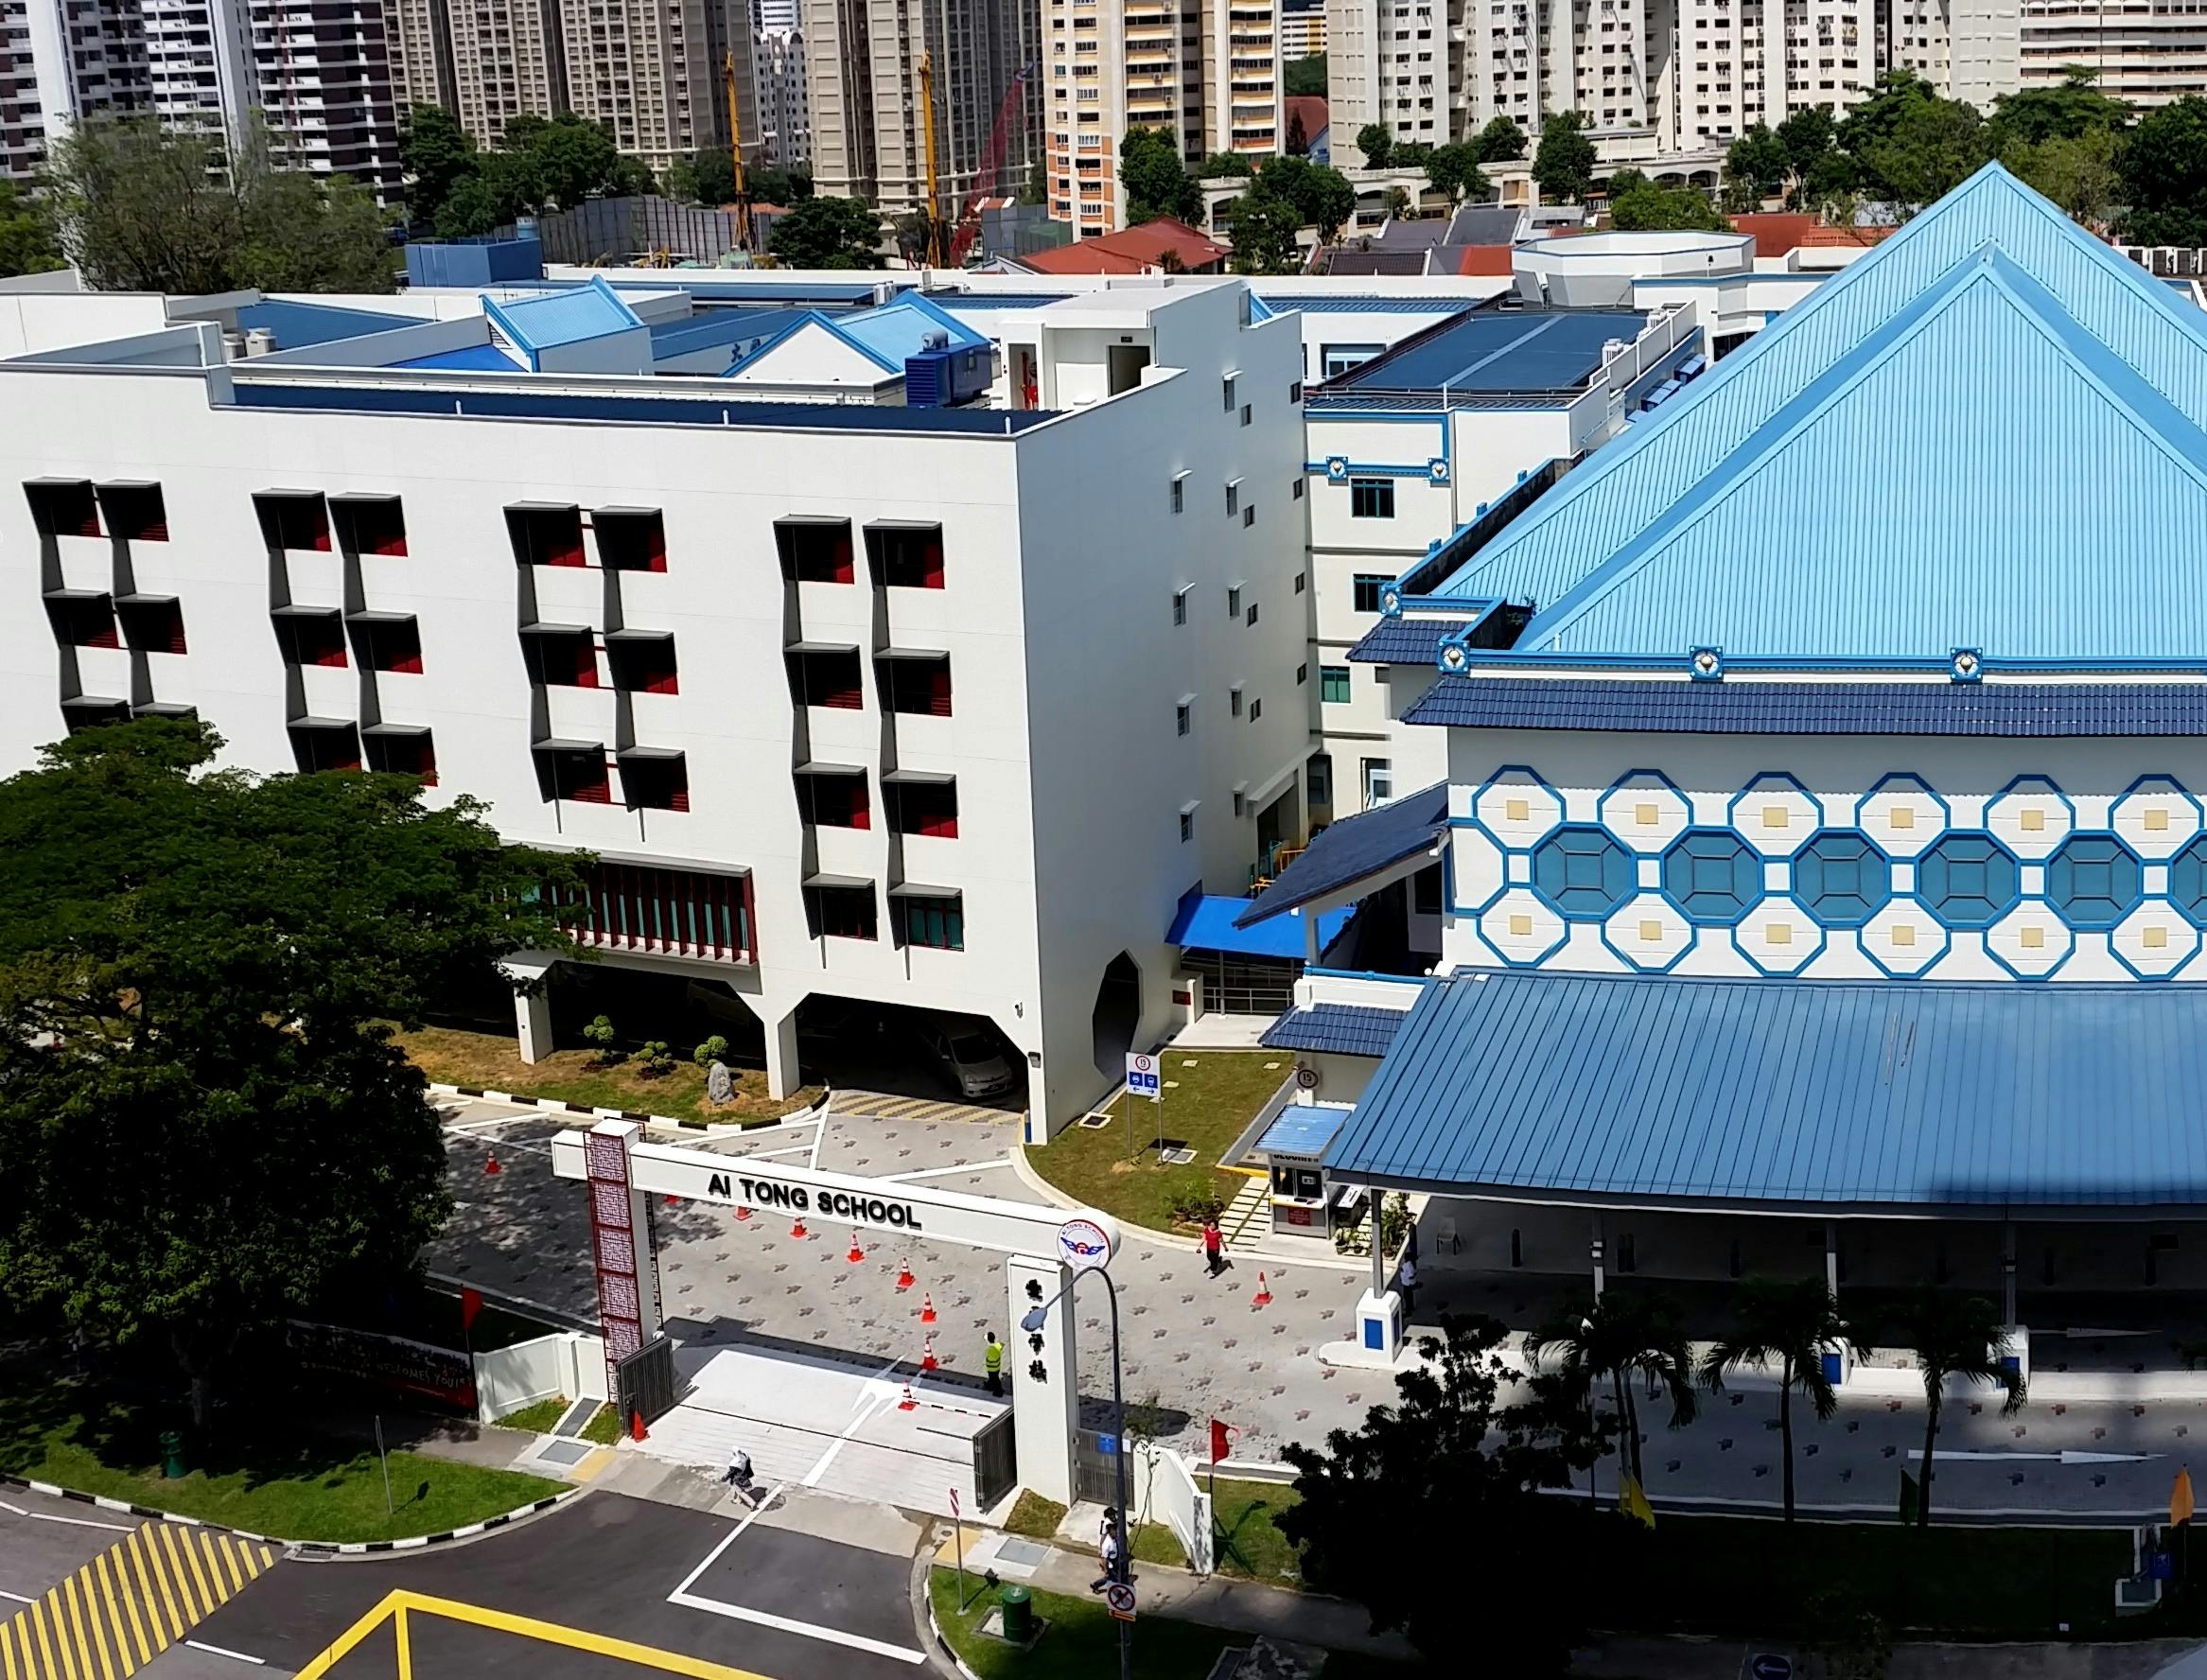 Aerial view of Ai Tong School, which is just one of the schools in the vicinity of Belgravia Villas